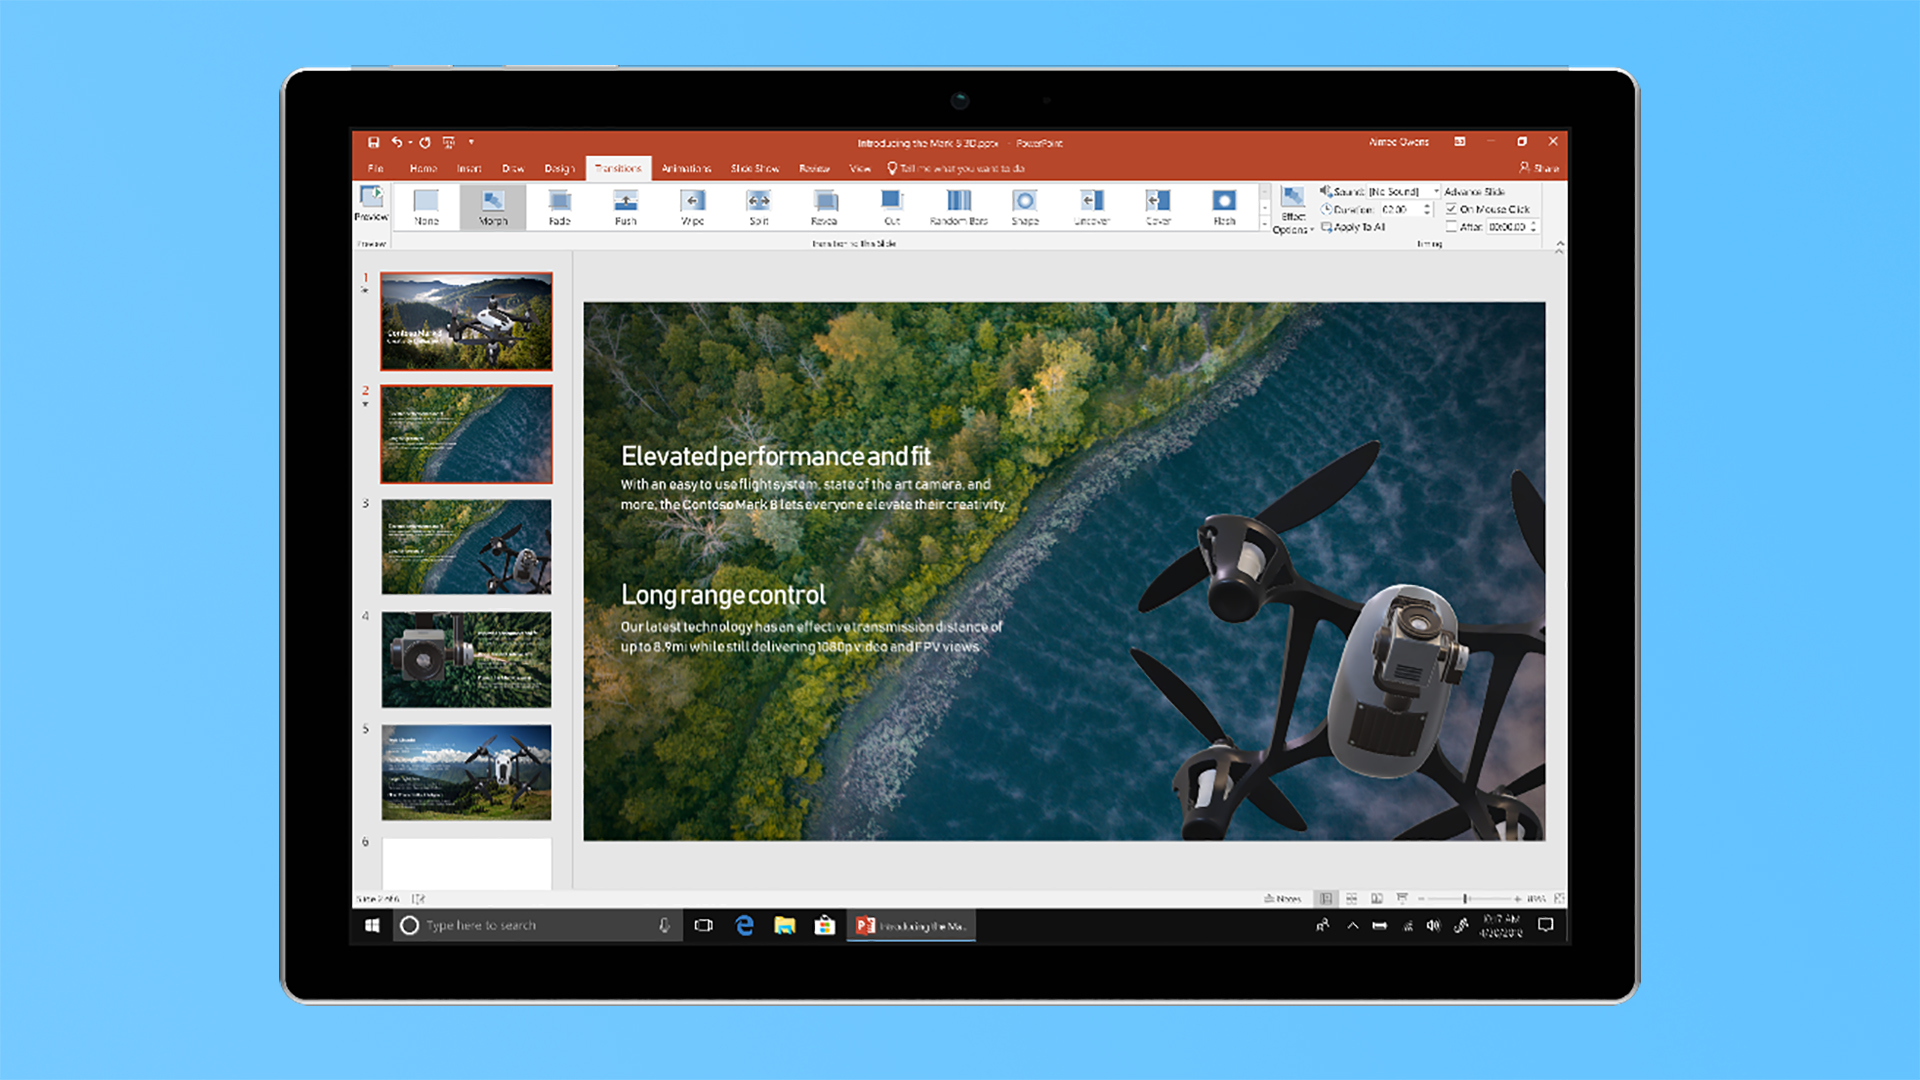 install office 2016 for mac with office 365